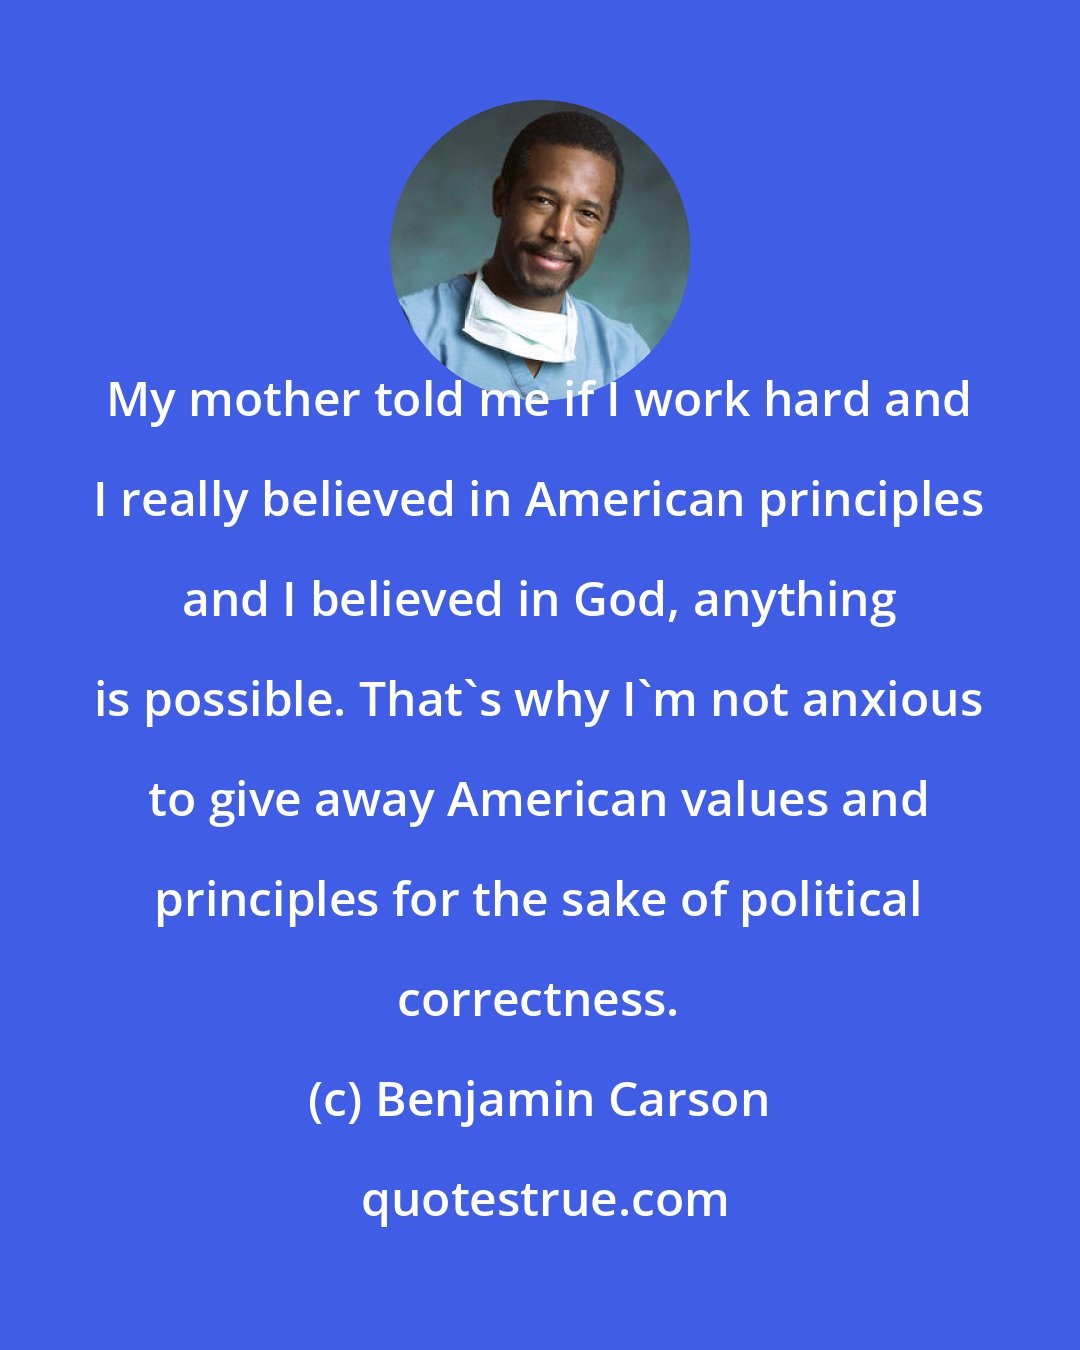 Benjamin Carson: My mother told me if I work hard and I really believed in American principles and I believed in God, anything is possible. That's why I'm not anxious to give away American values and principles for the sake of political correctness.